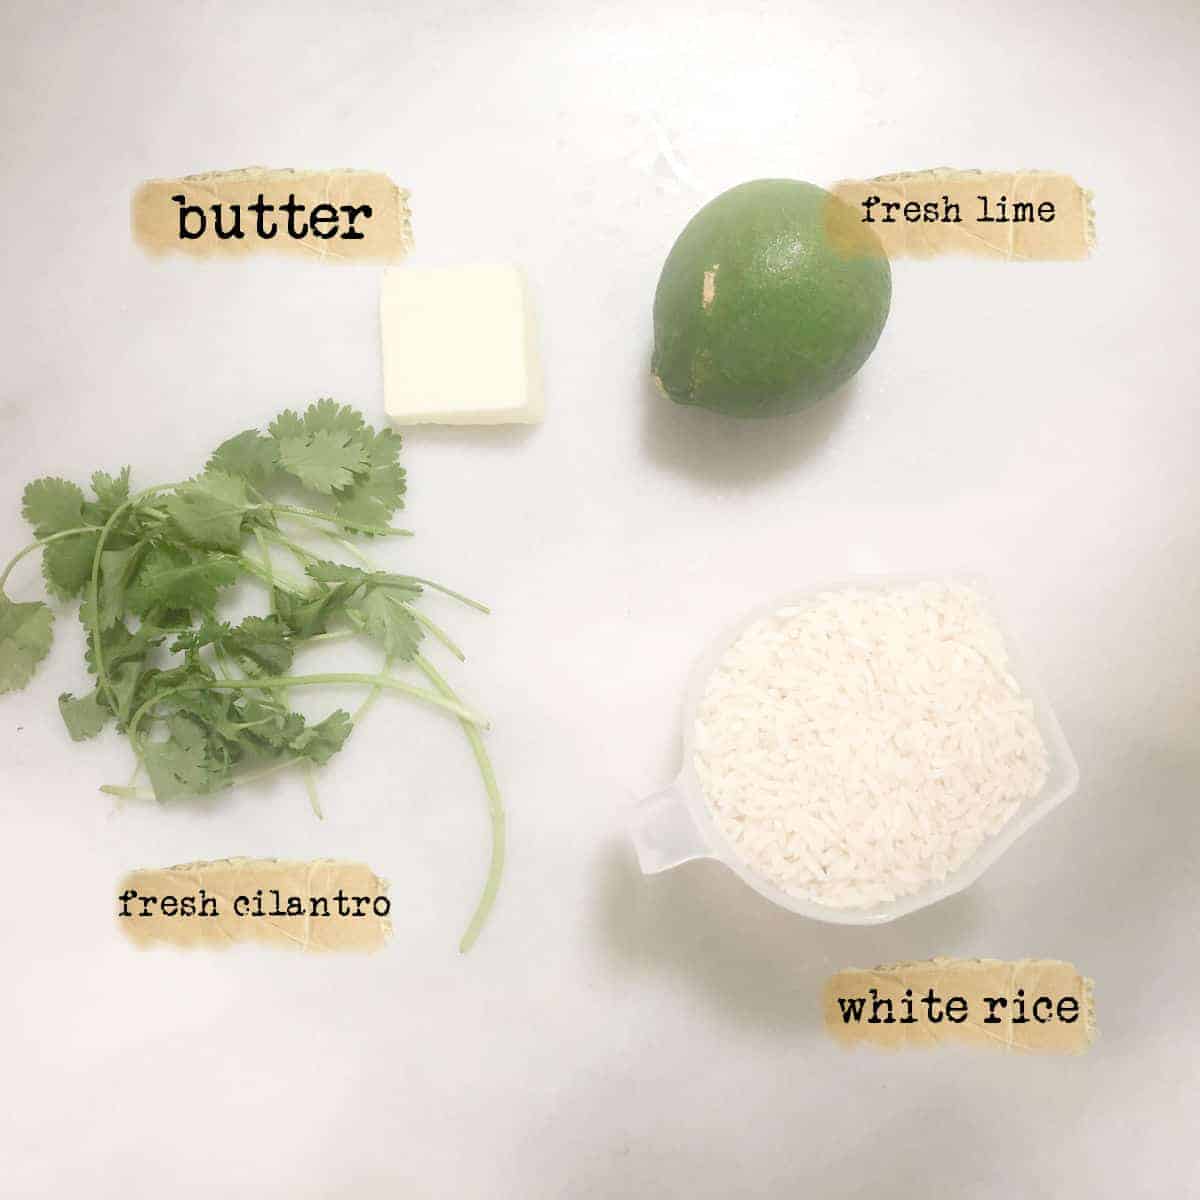 rice, butter, fresh lime, and cilantro ingredients